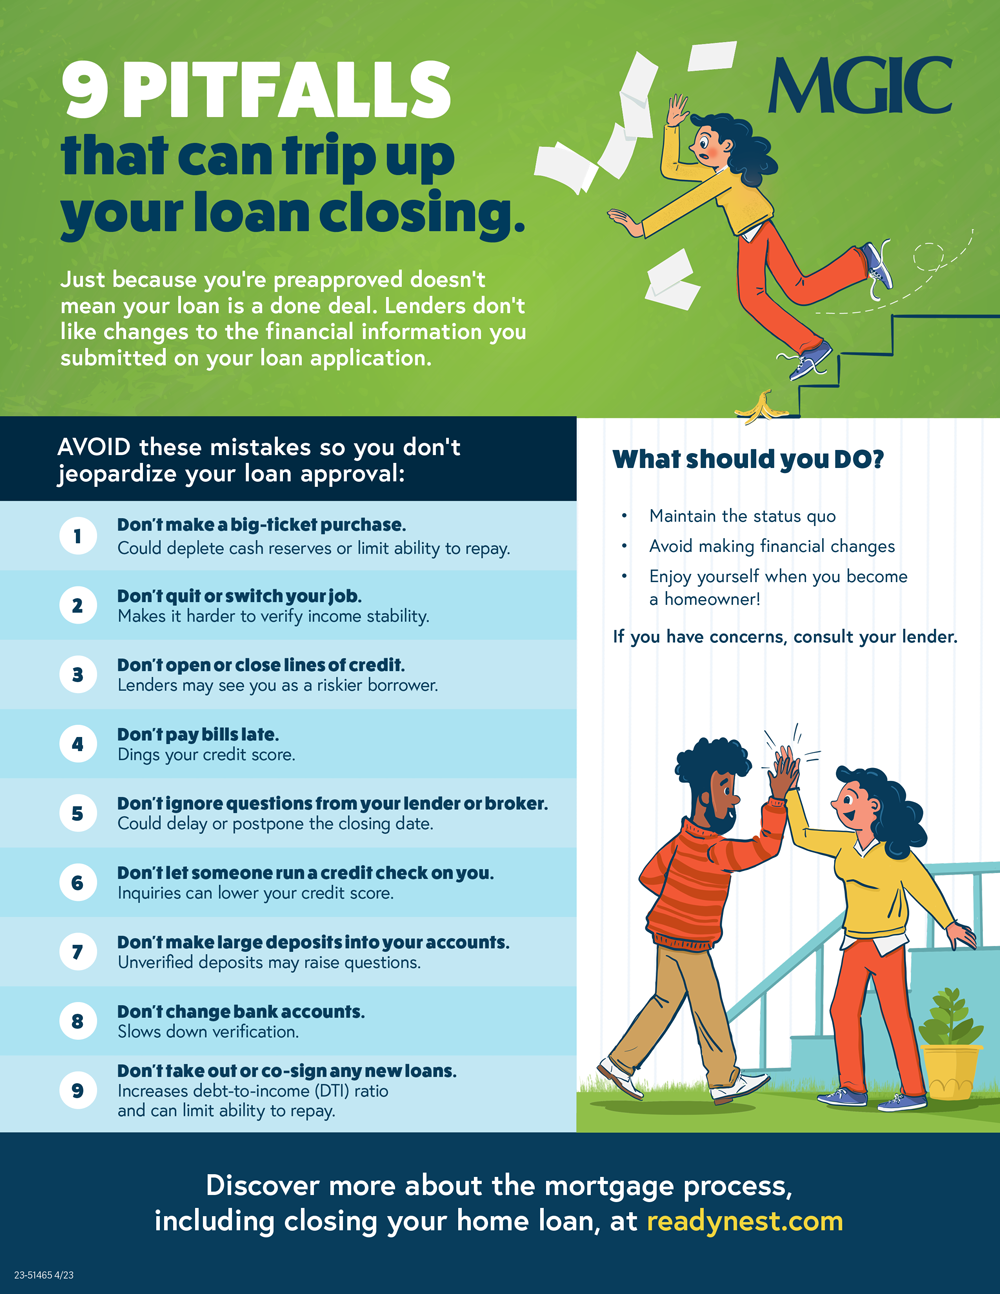 9 pitfalls that can trip up your loan closing